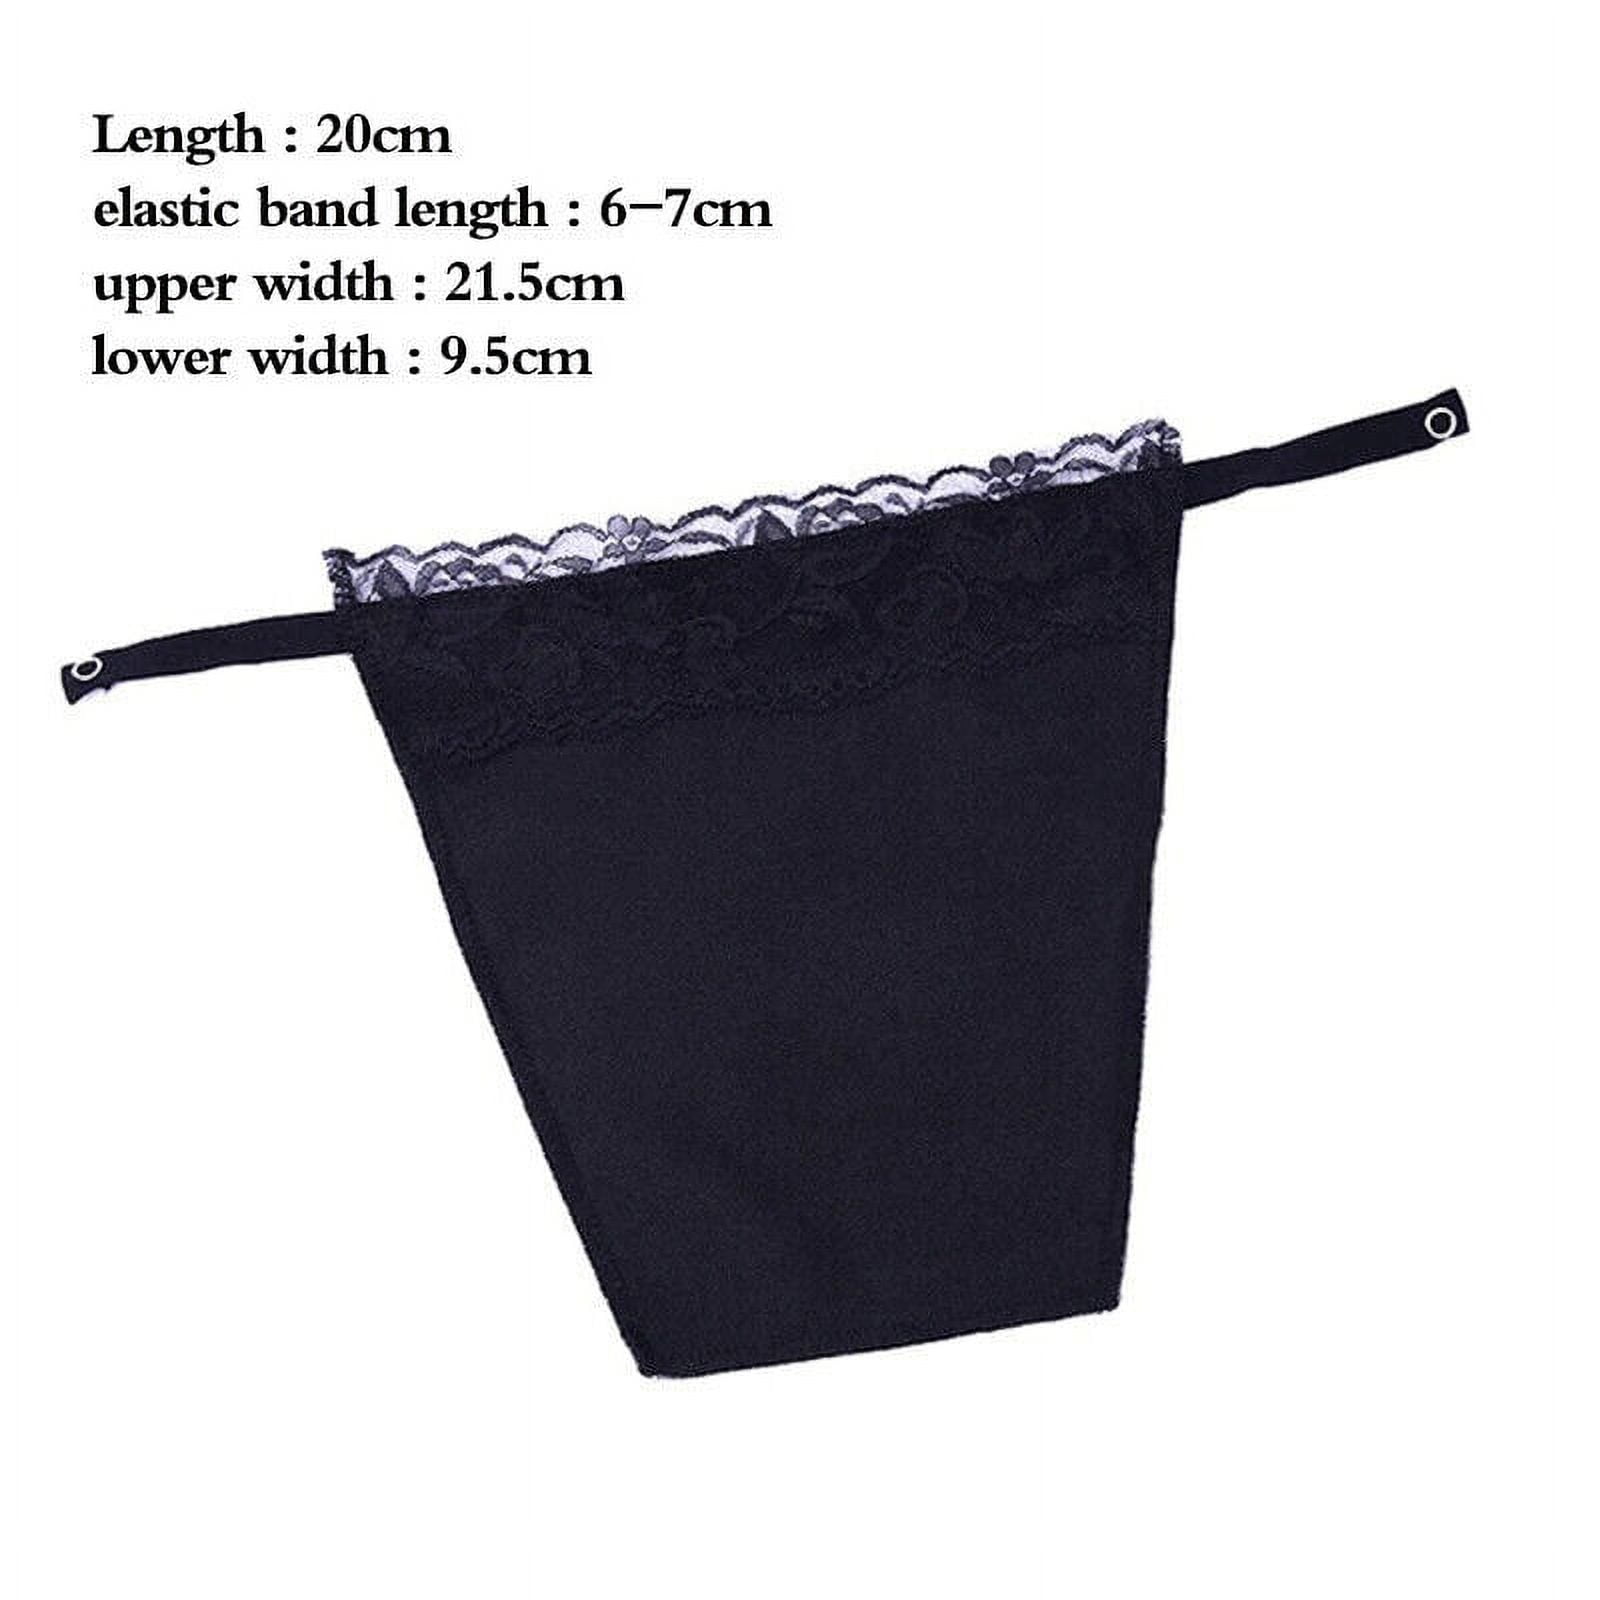 Other Health Beauty Items Women Quick Easy Clipon Lace Mock Camisole Bra  Insert Wrapped Chest Overlay Modesty Panel X0831 From Us_mississippi, $4.99